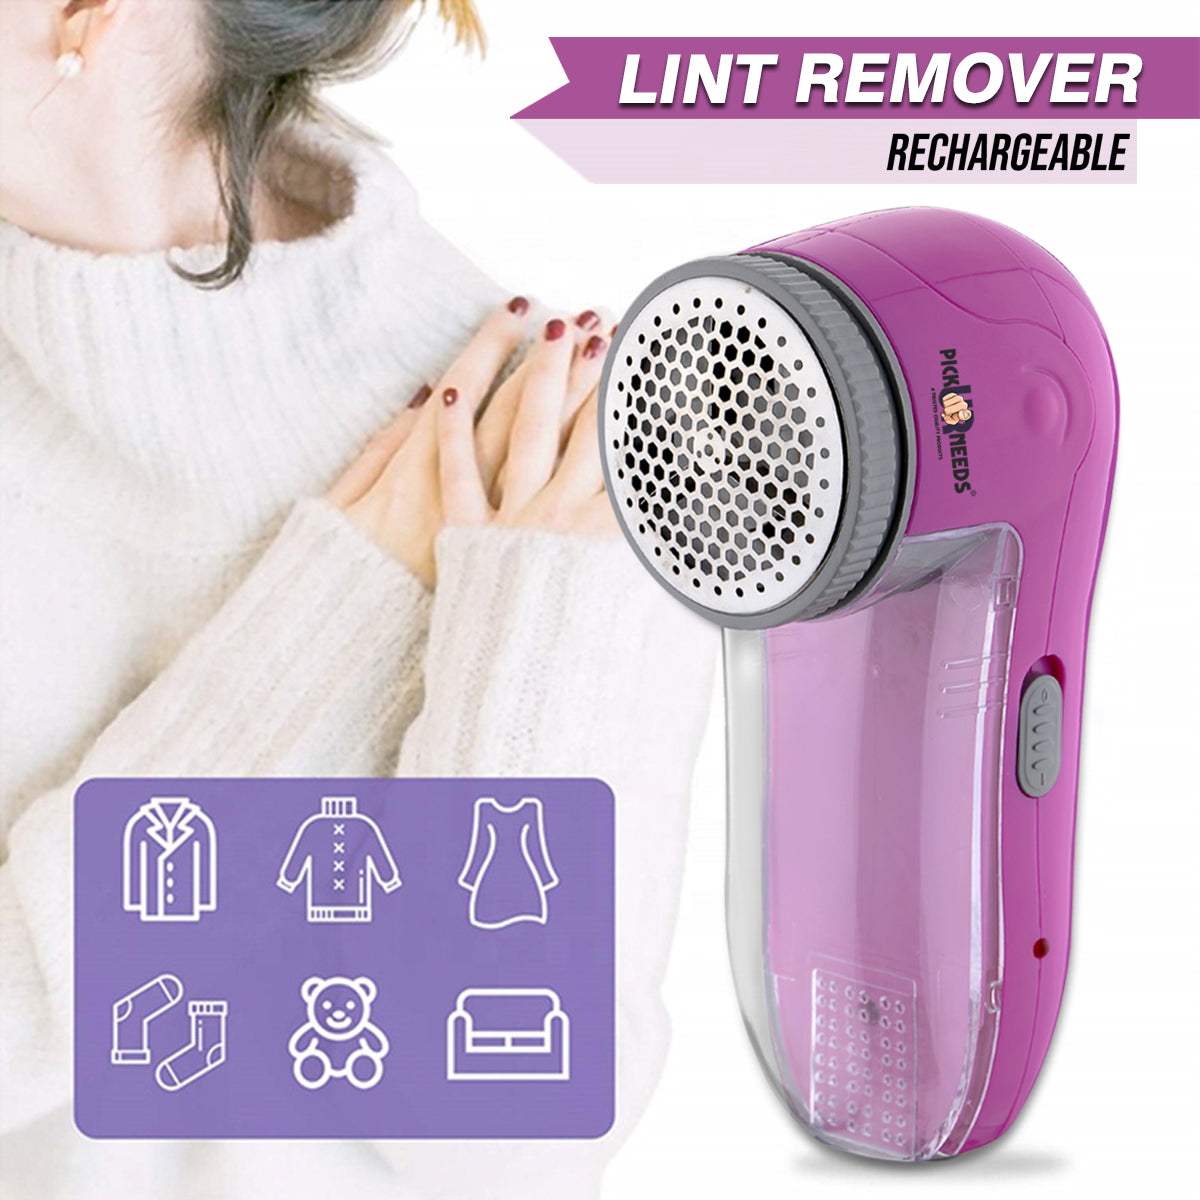 Pick Ur Needs Lint Remover for Clothing with Rechargeable USB Charging Cord, Ball Shaver with 1 Extra Floating Blade, No More Lint